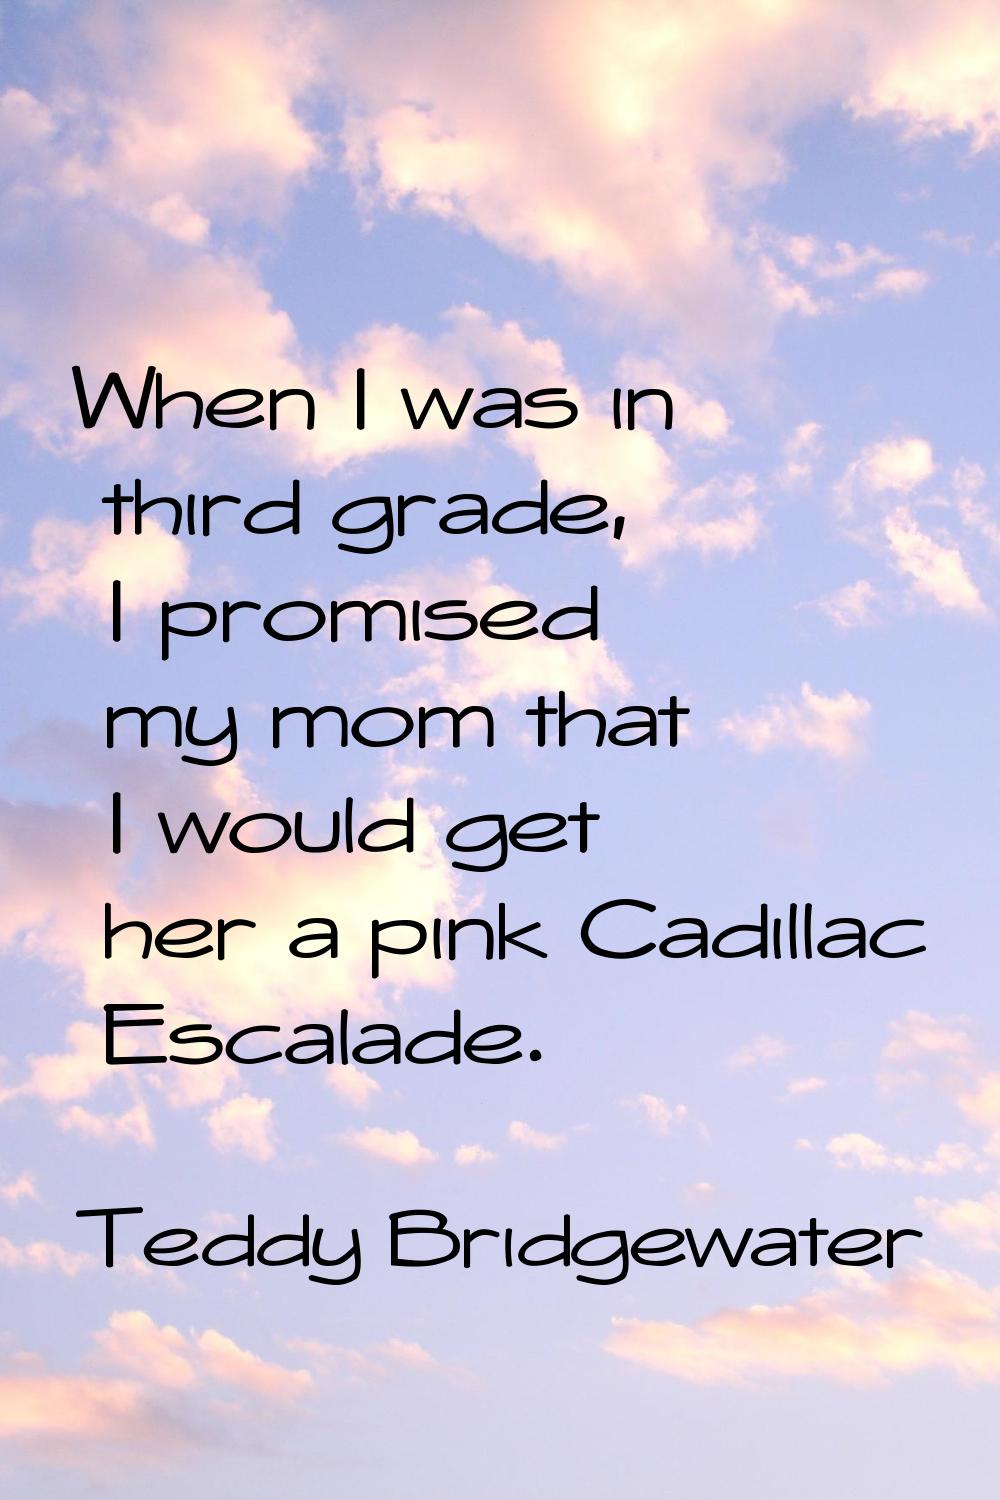 When I was in third grade, I promised my mom that I would get her a pink Cadillac Escalade.